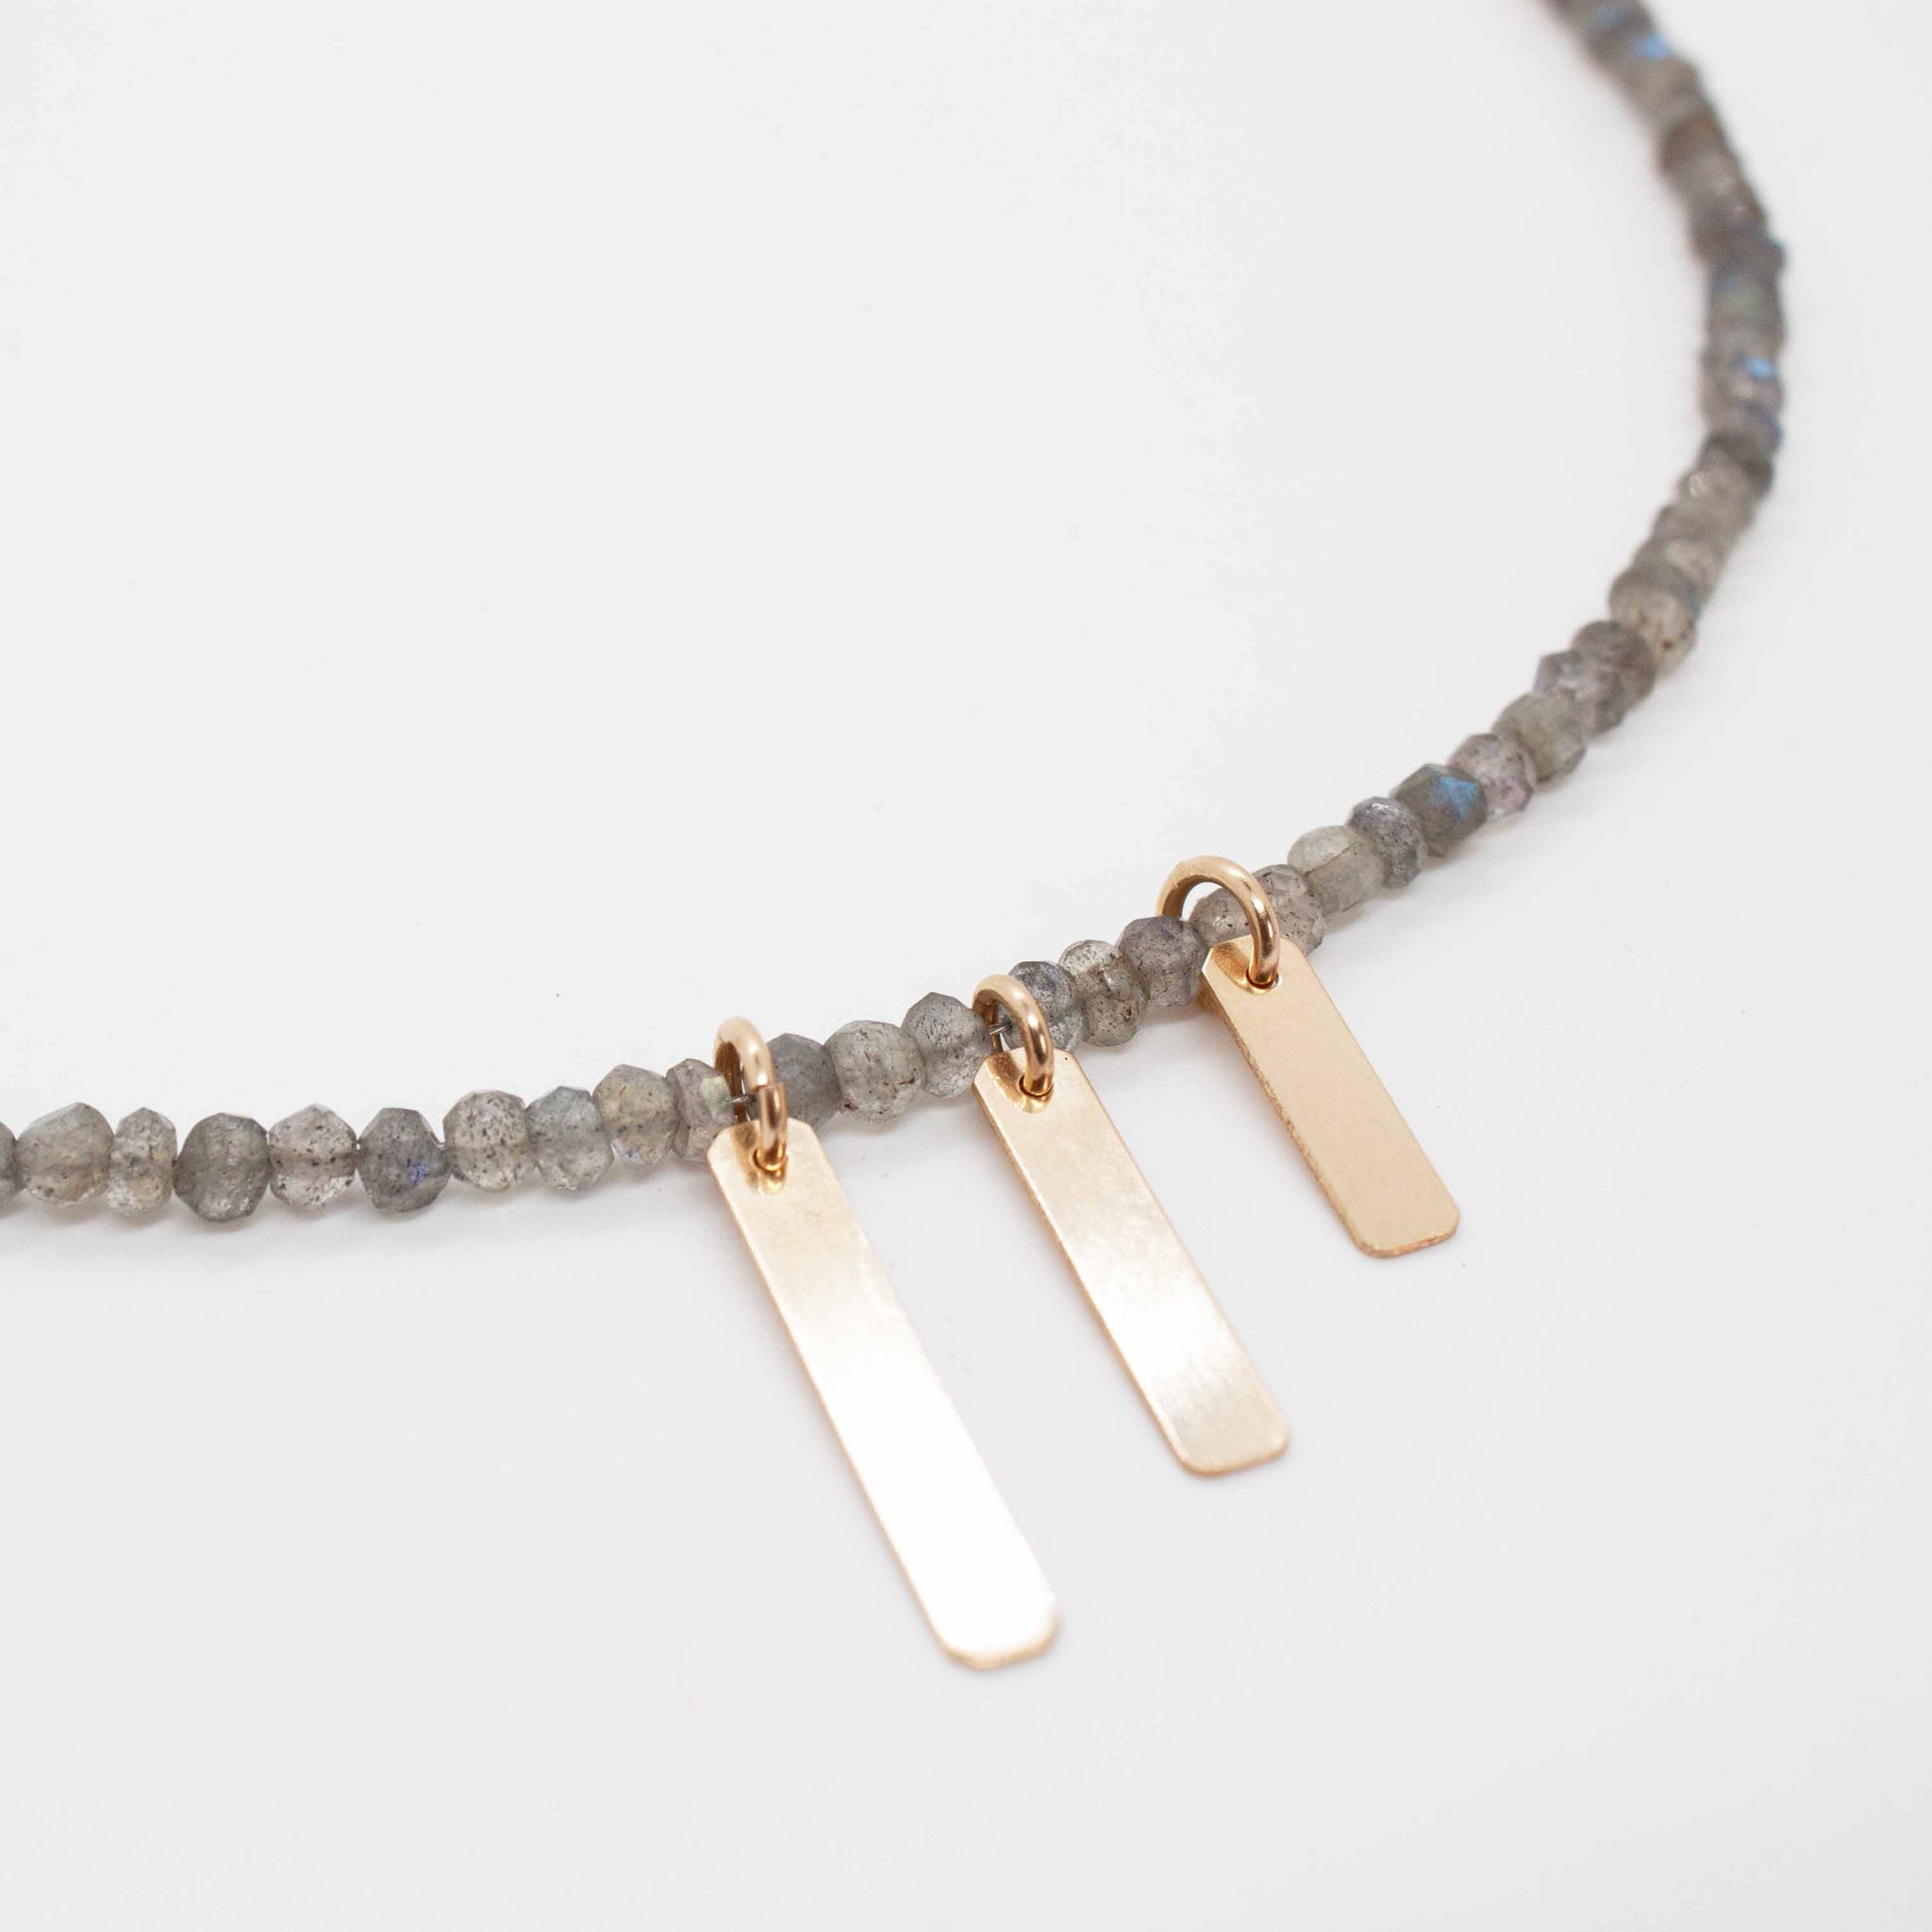 16 inch (adjustable to 18 inches) beaded labradorite necklace with cascading gold filled bars and lobster clasp.